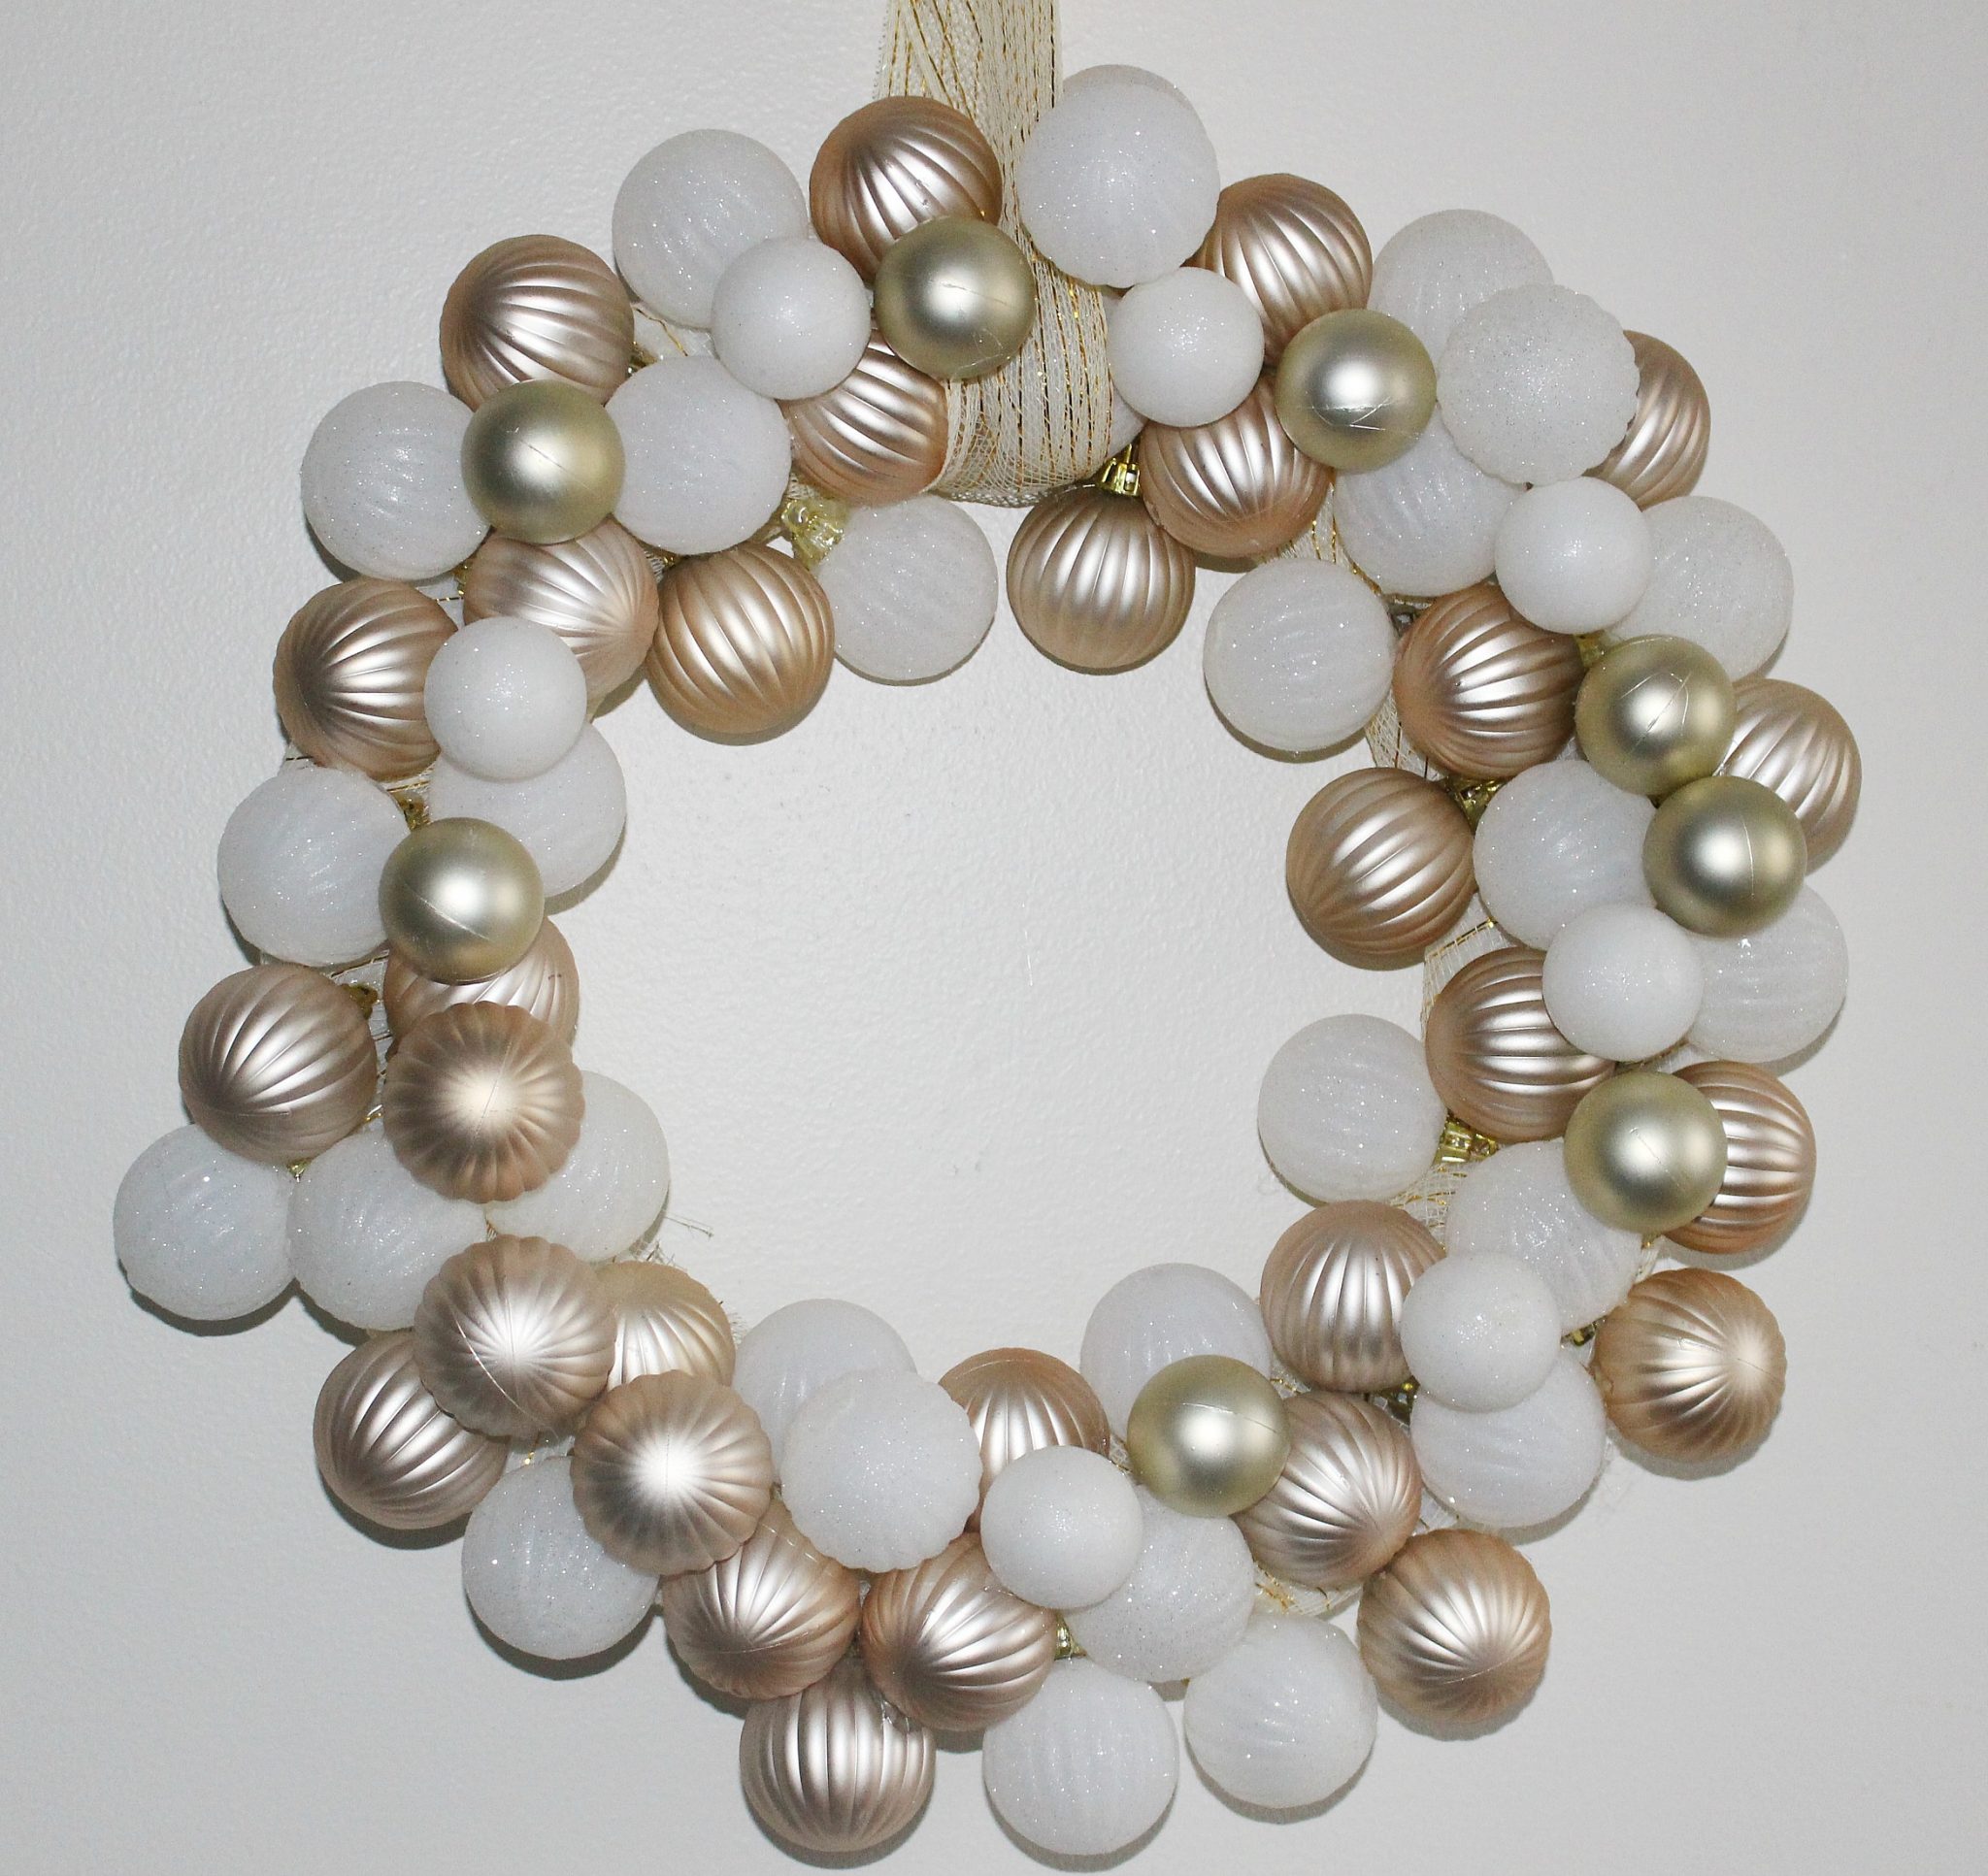 Make A Rose Gold & White Dollar Tree Ornament Wreath Our Crafty Mom